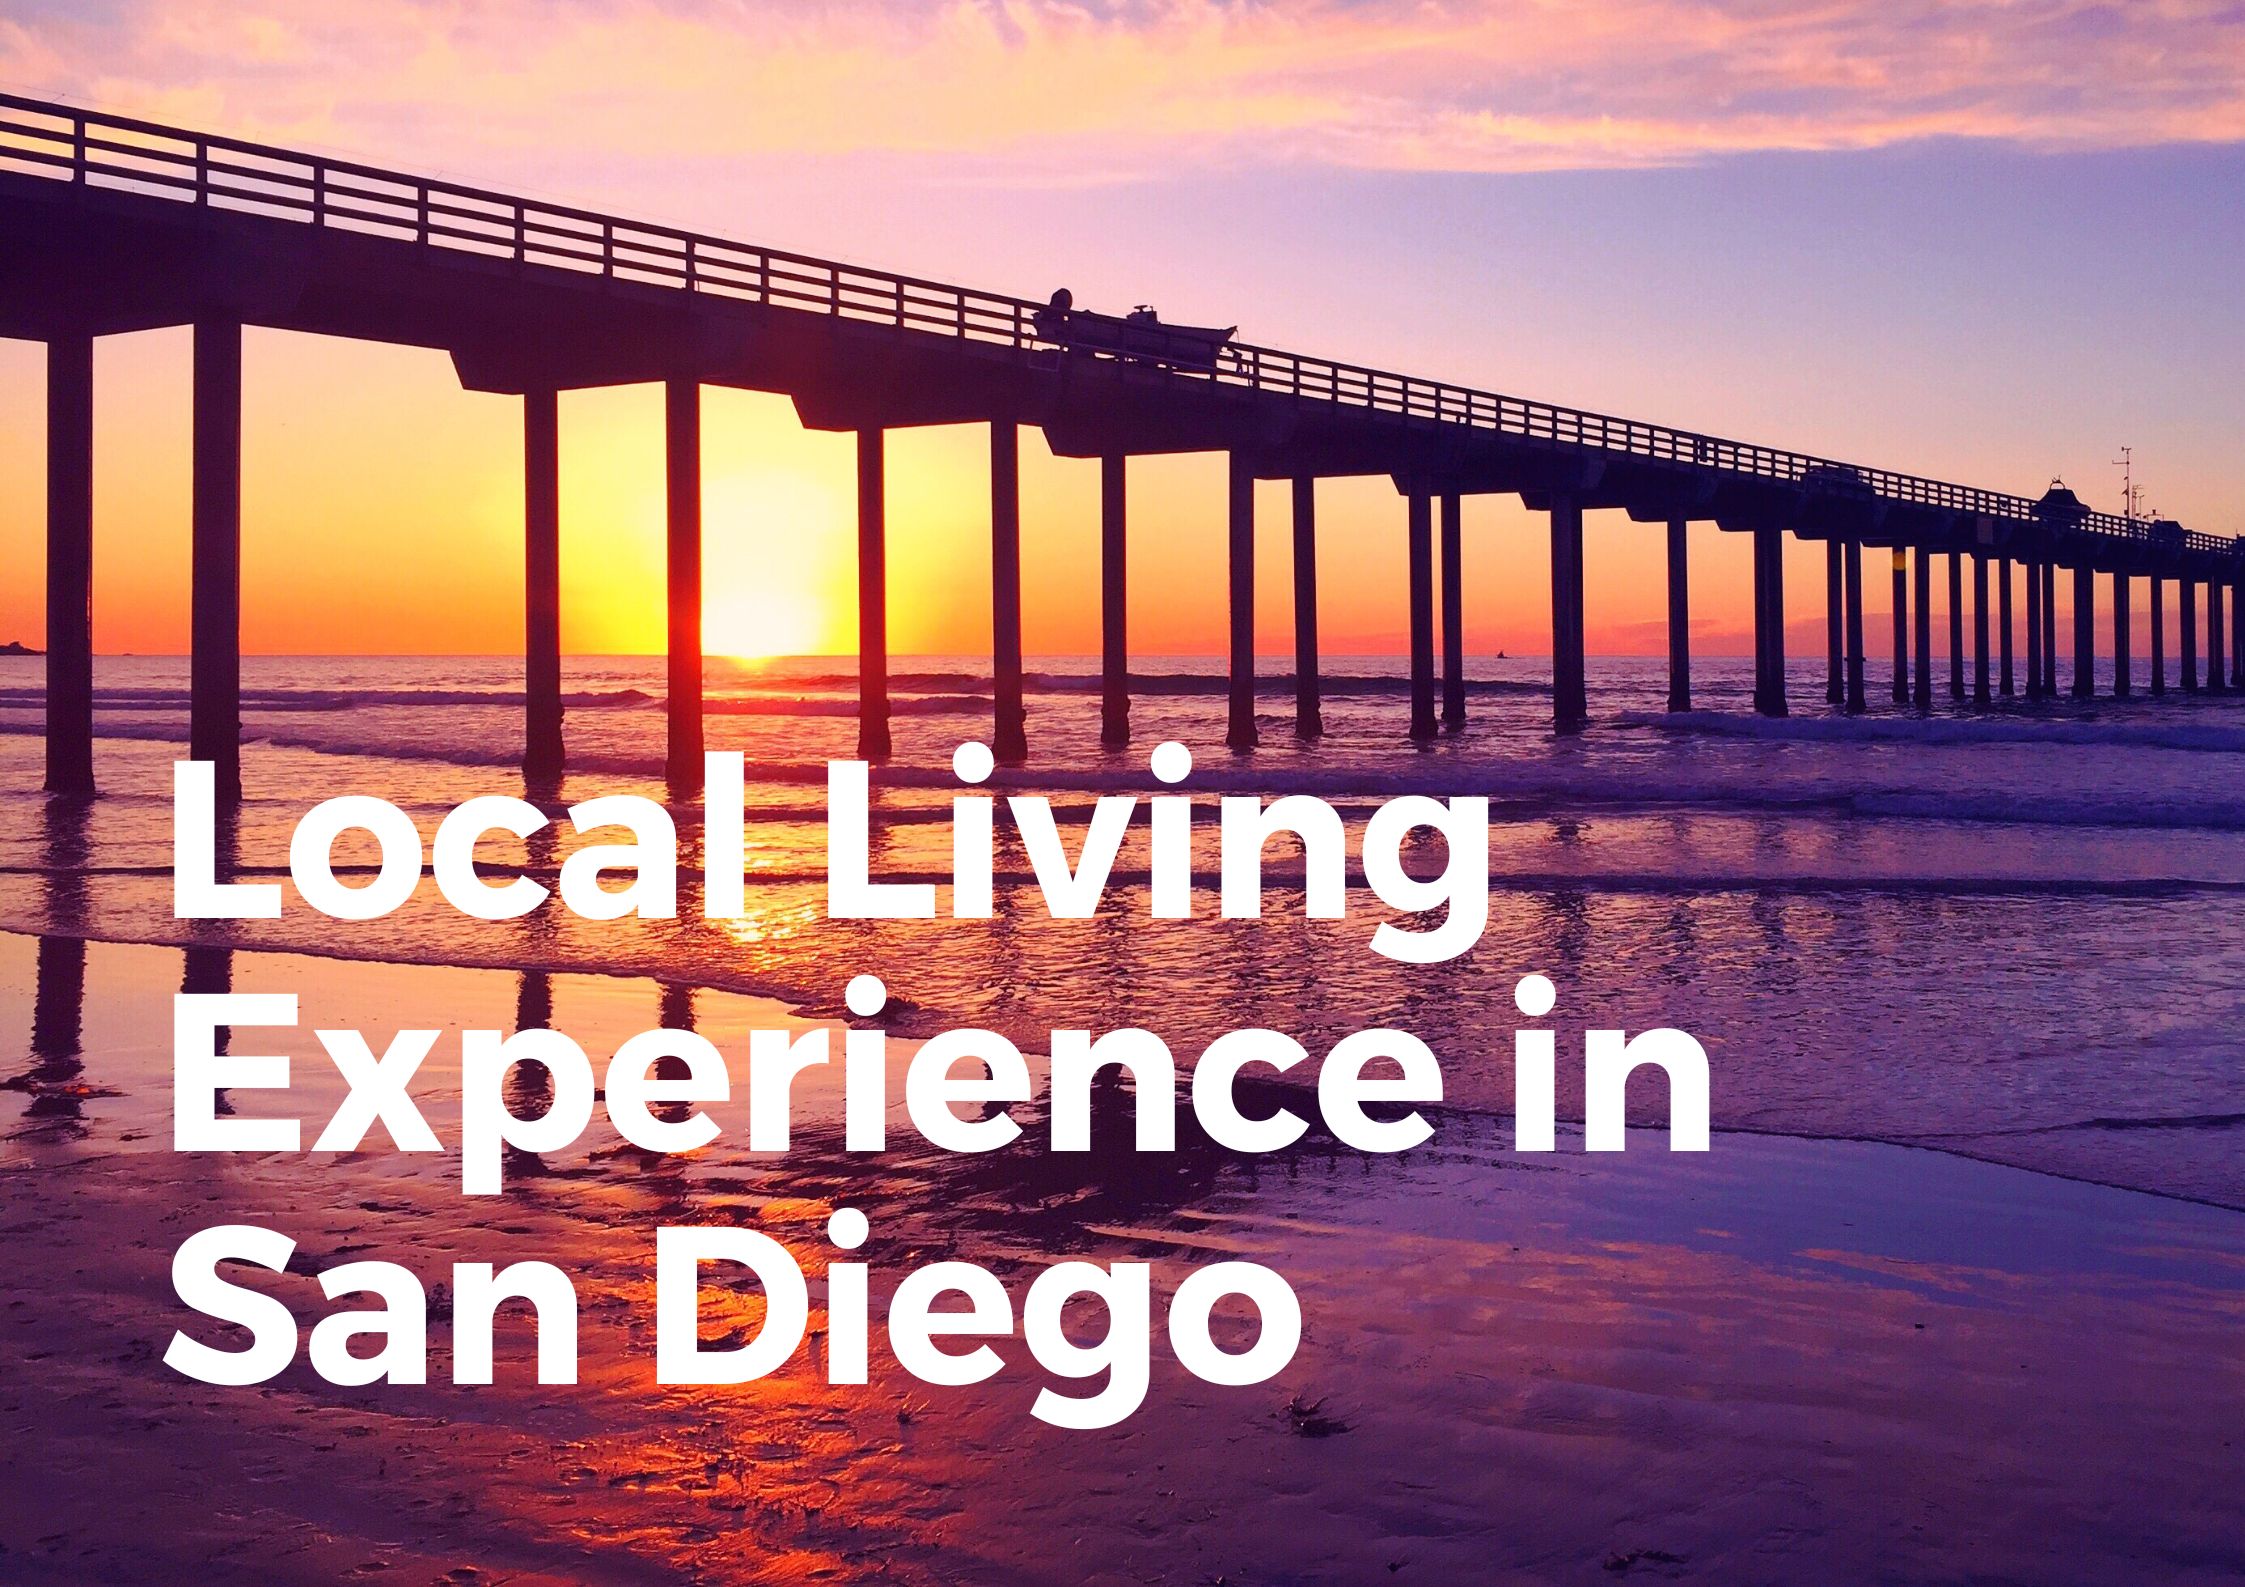 Local-Living-Experience-in-San-Diego